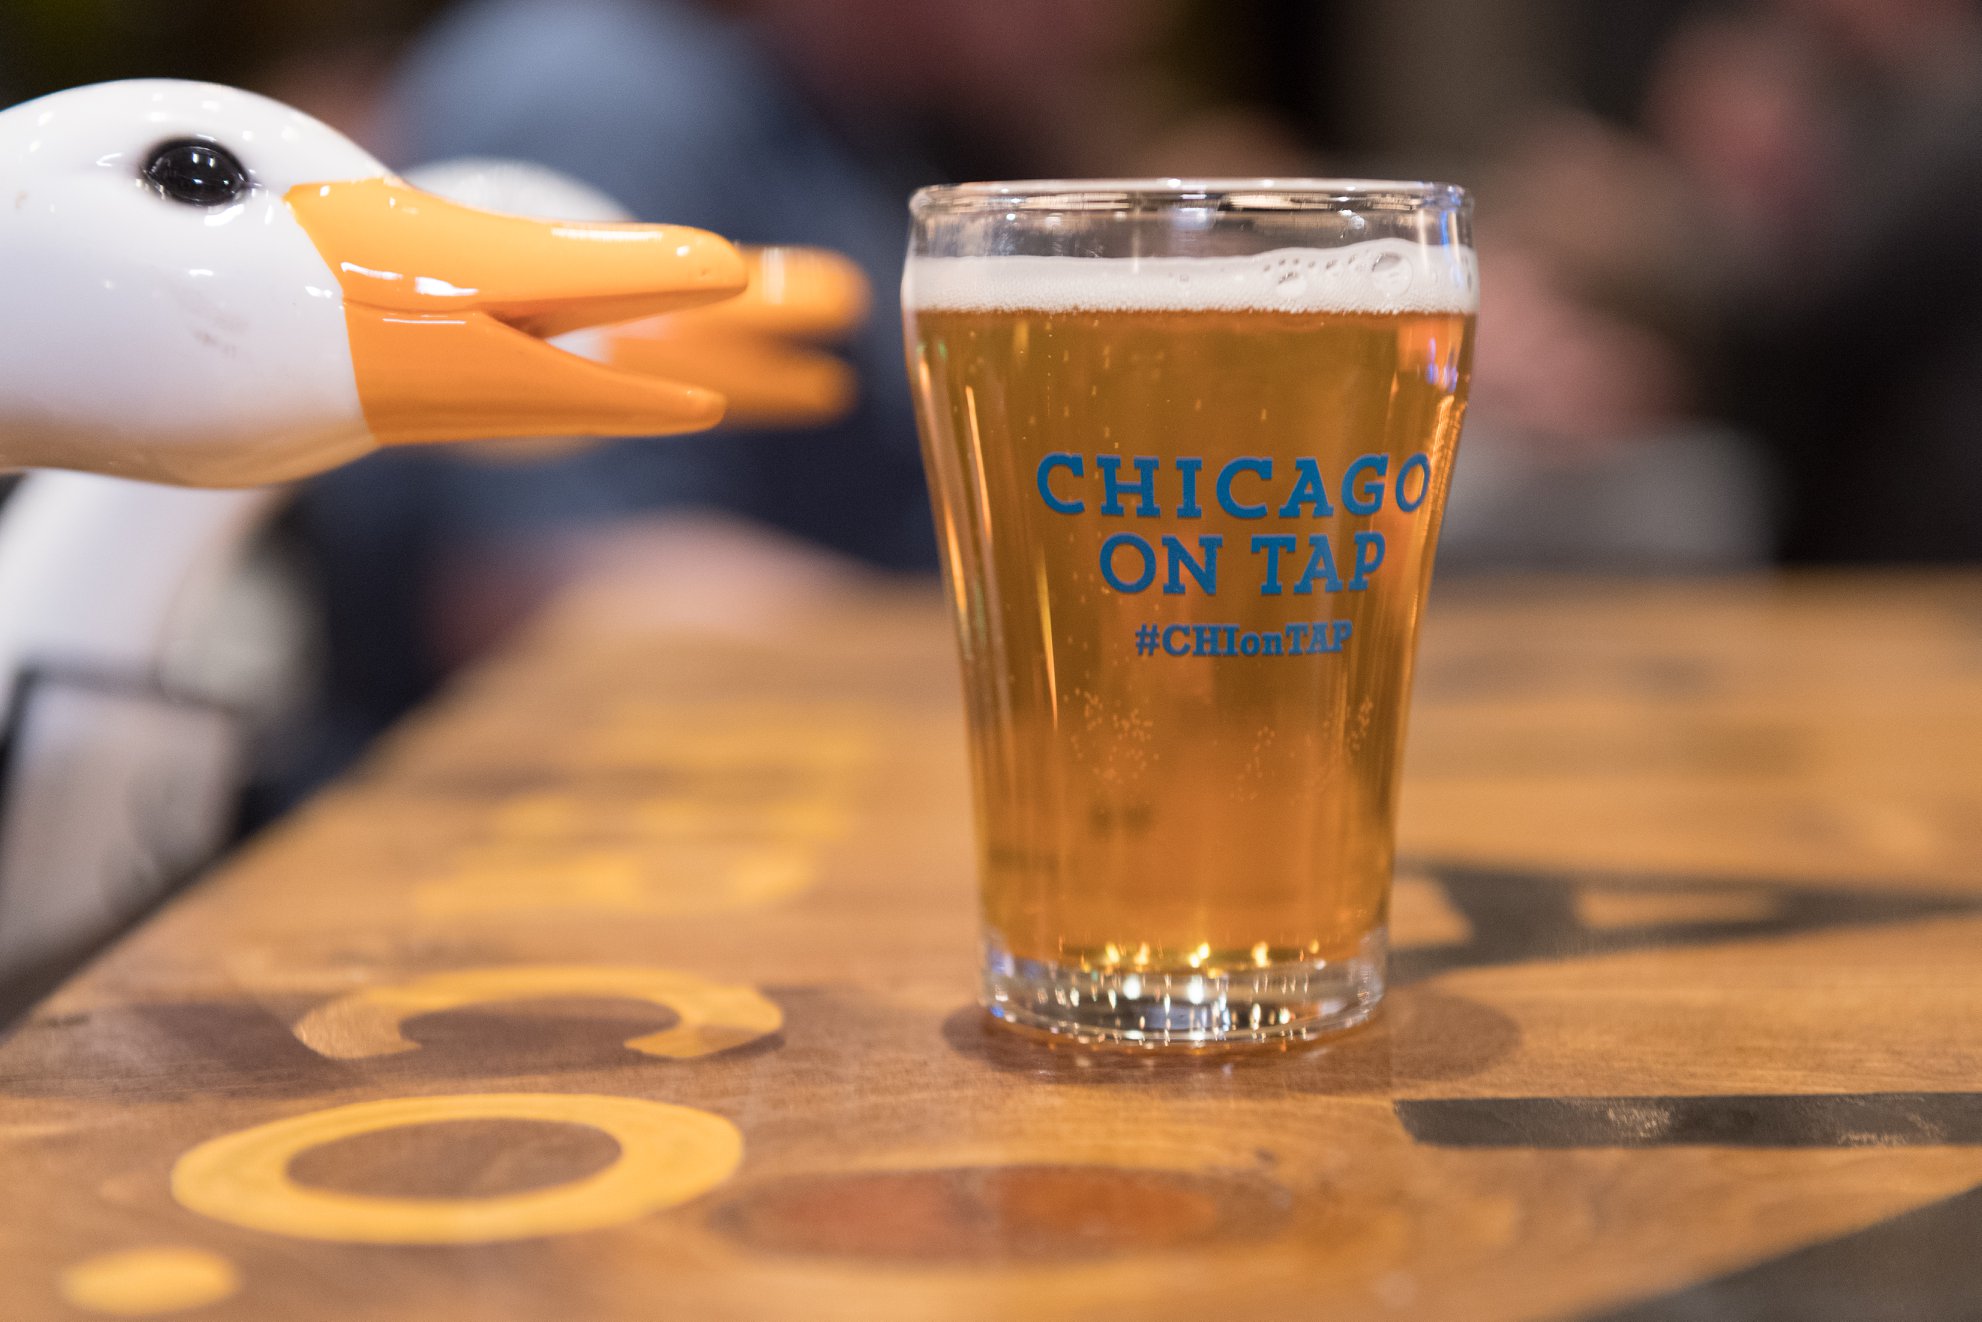 Chicago on Tap, Meals on Wheels